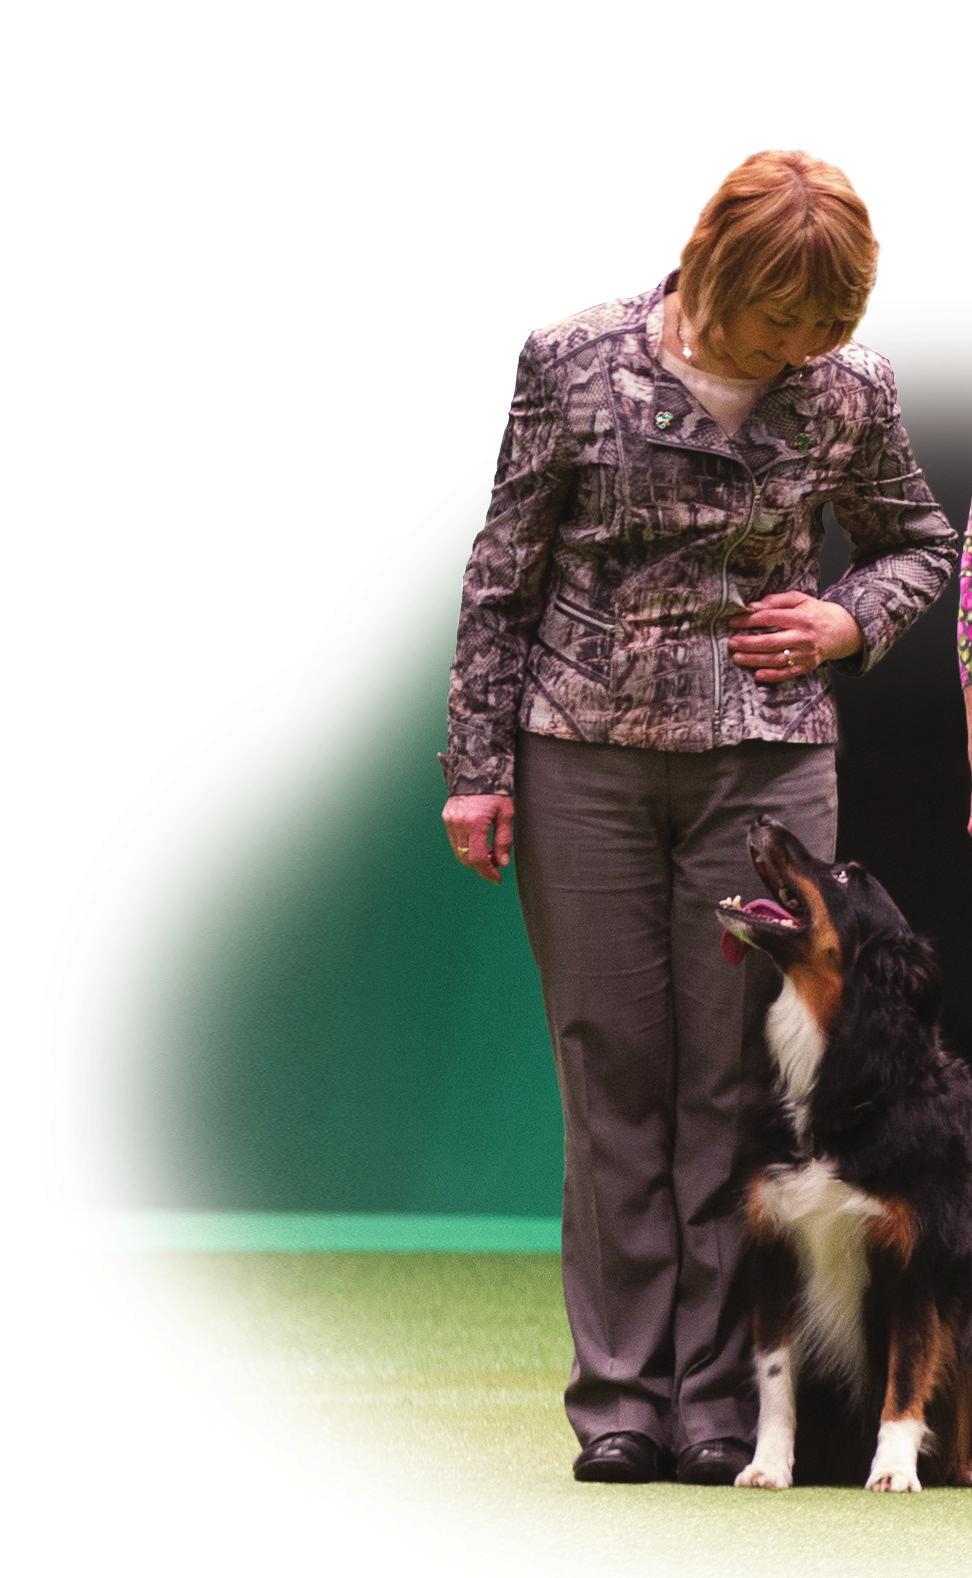 competition management profile and risk assessment to show evidence to suitability to hold a Kennel Club licenced show.